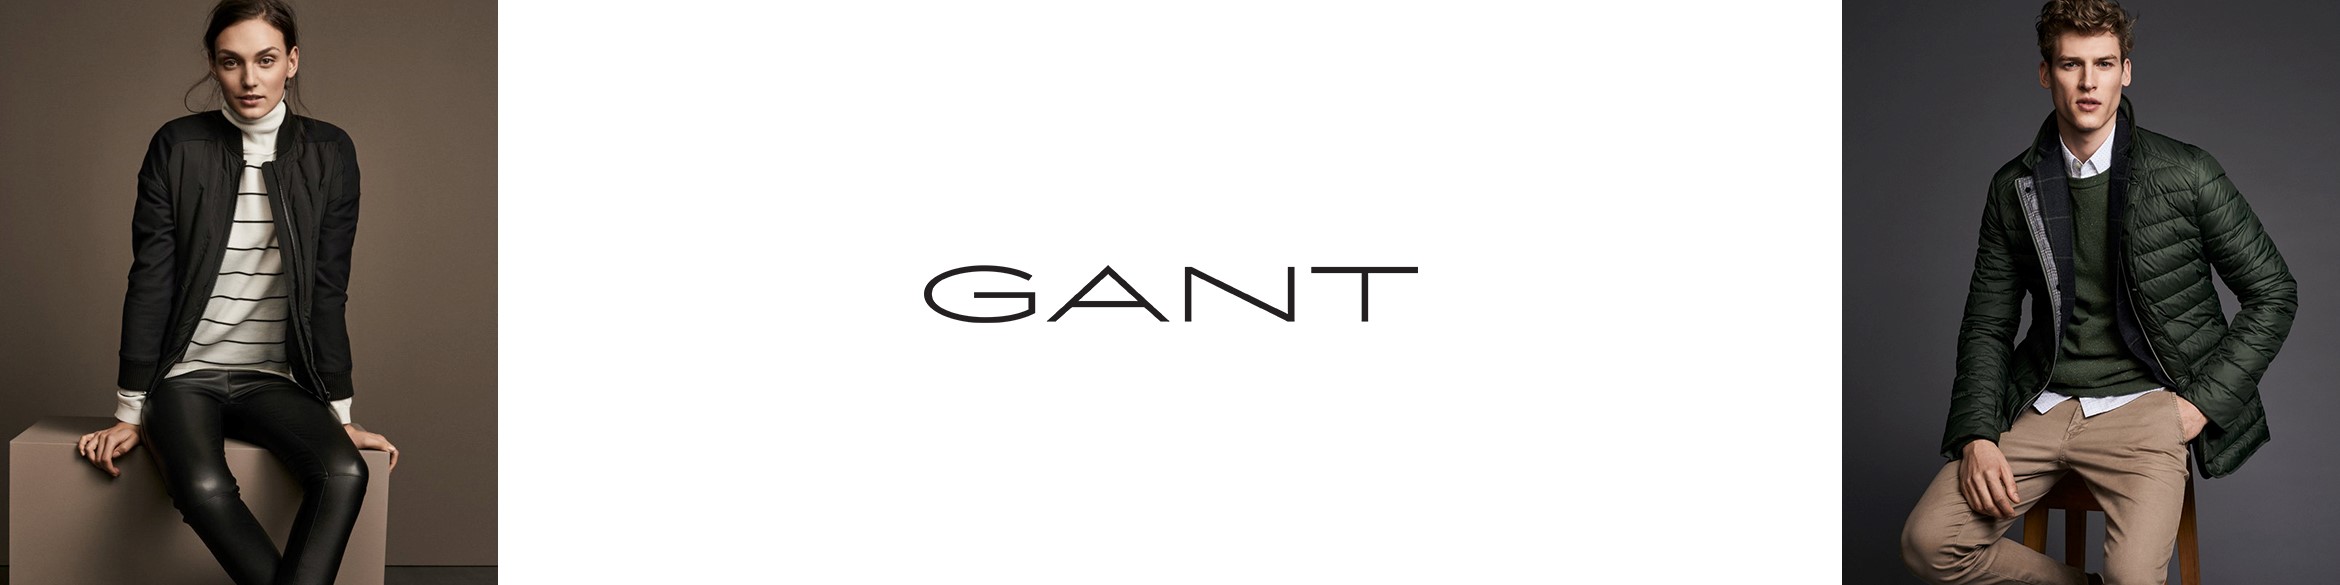 Gant clearance outlet